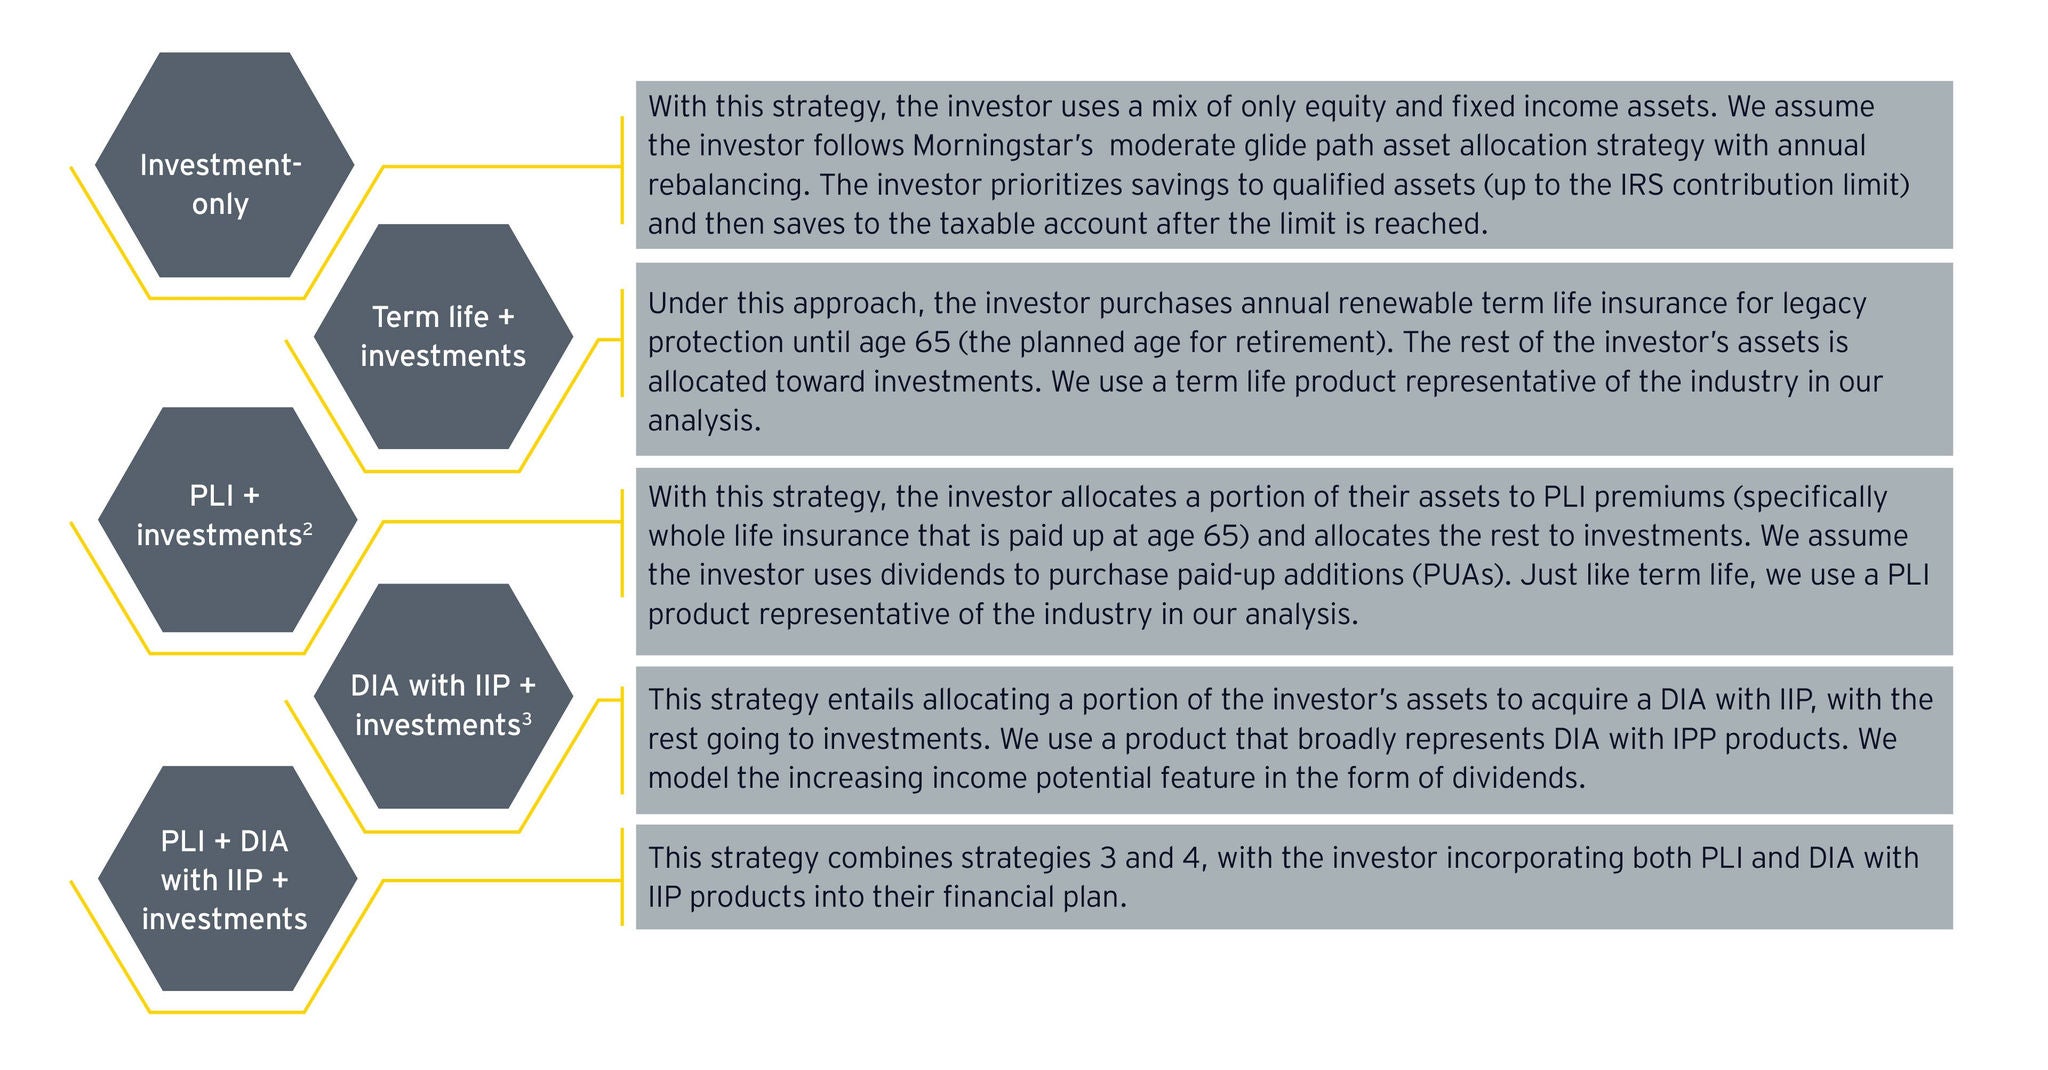 EY strategies and product specifications